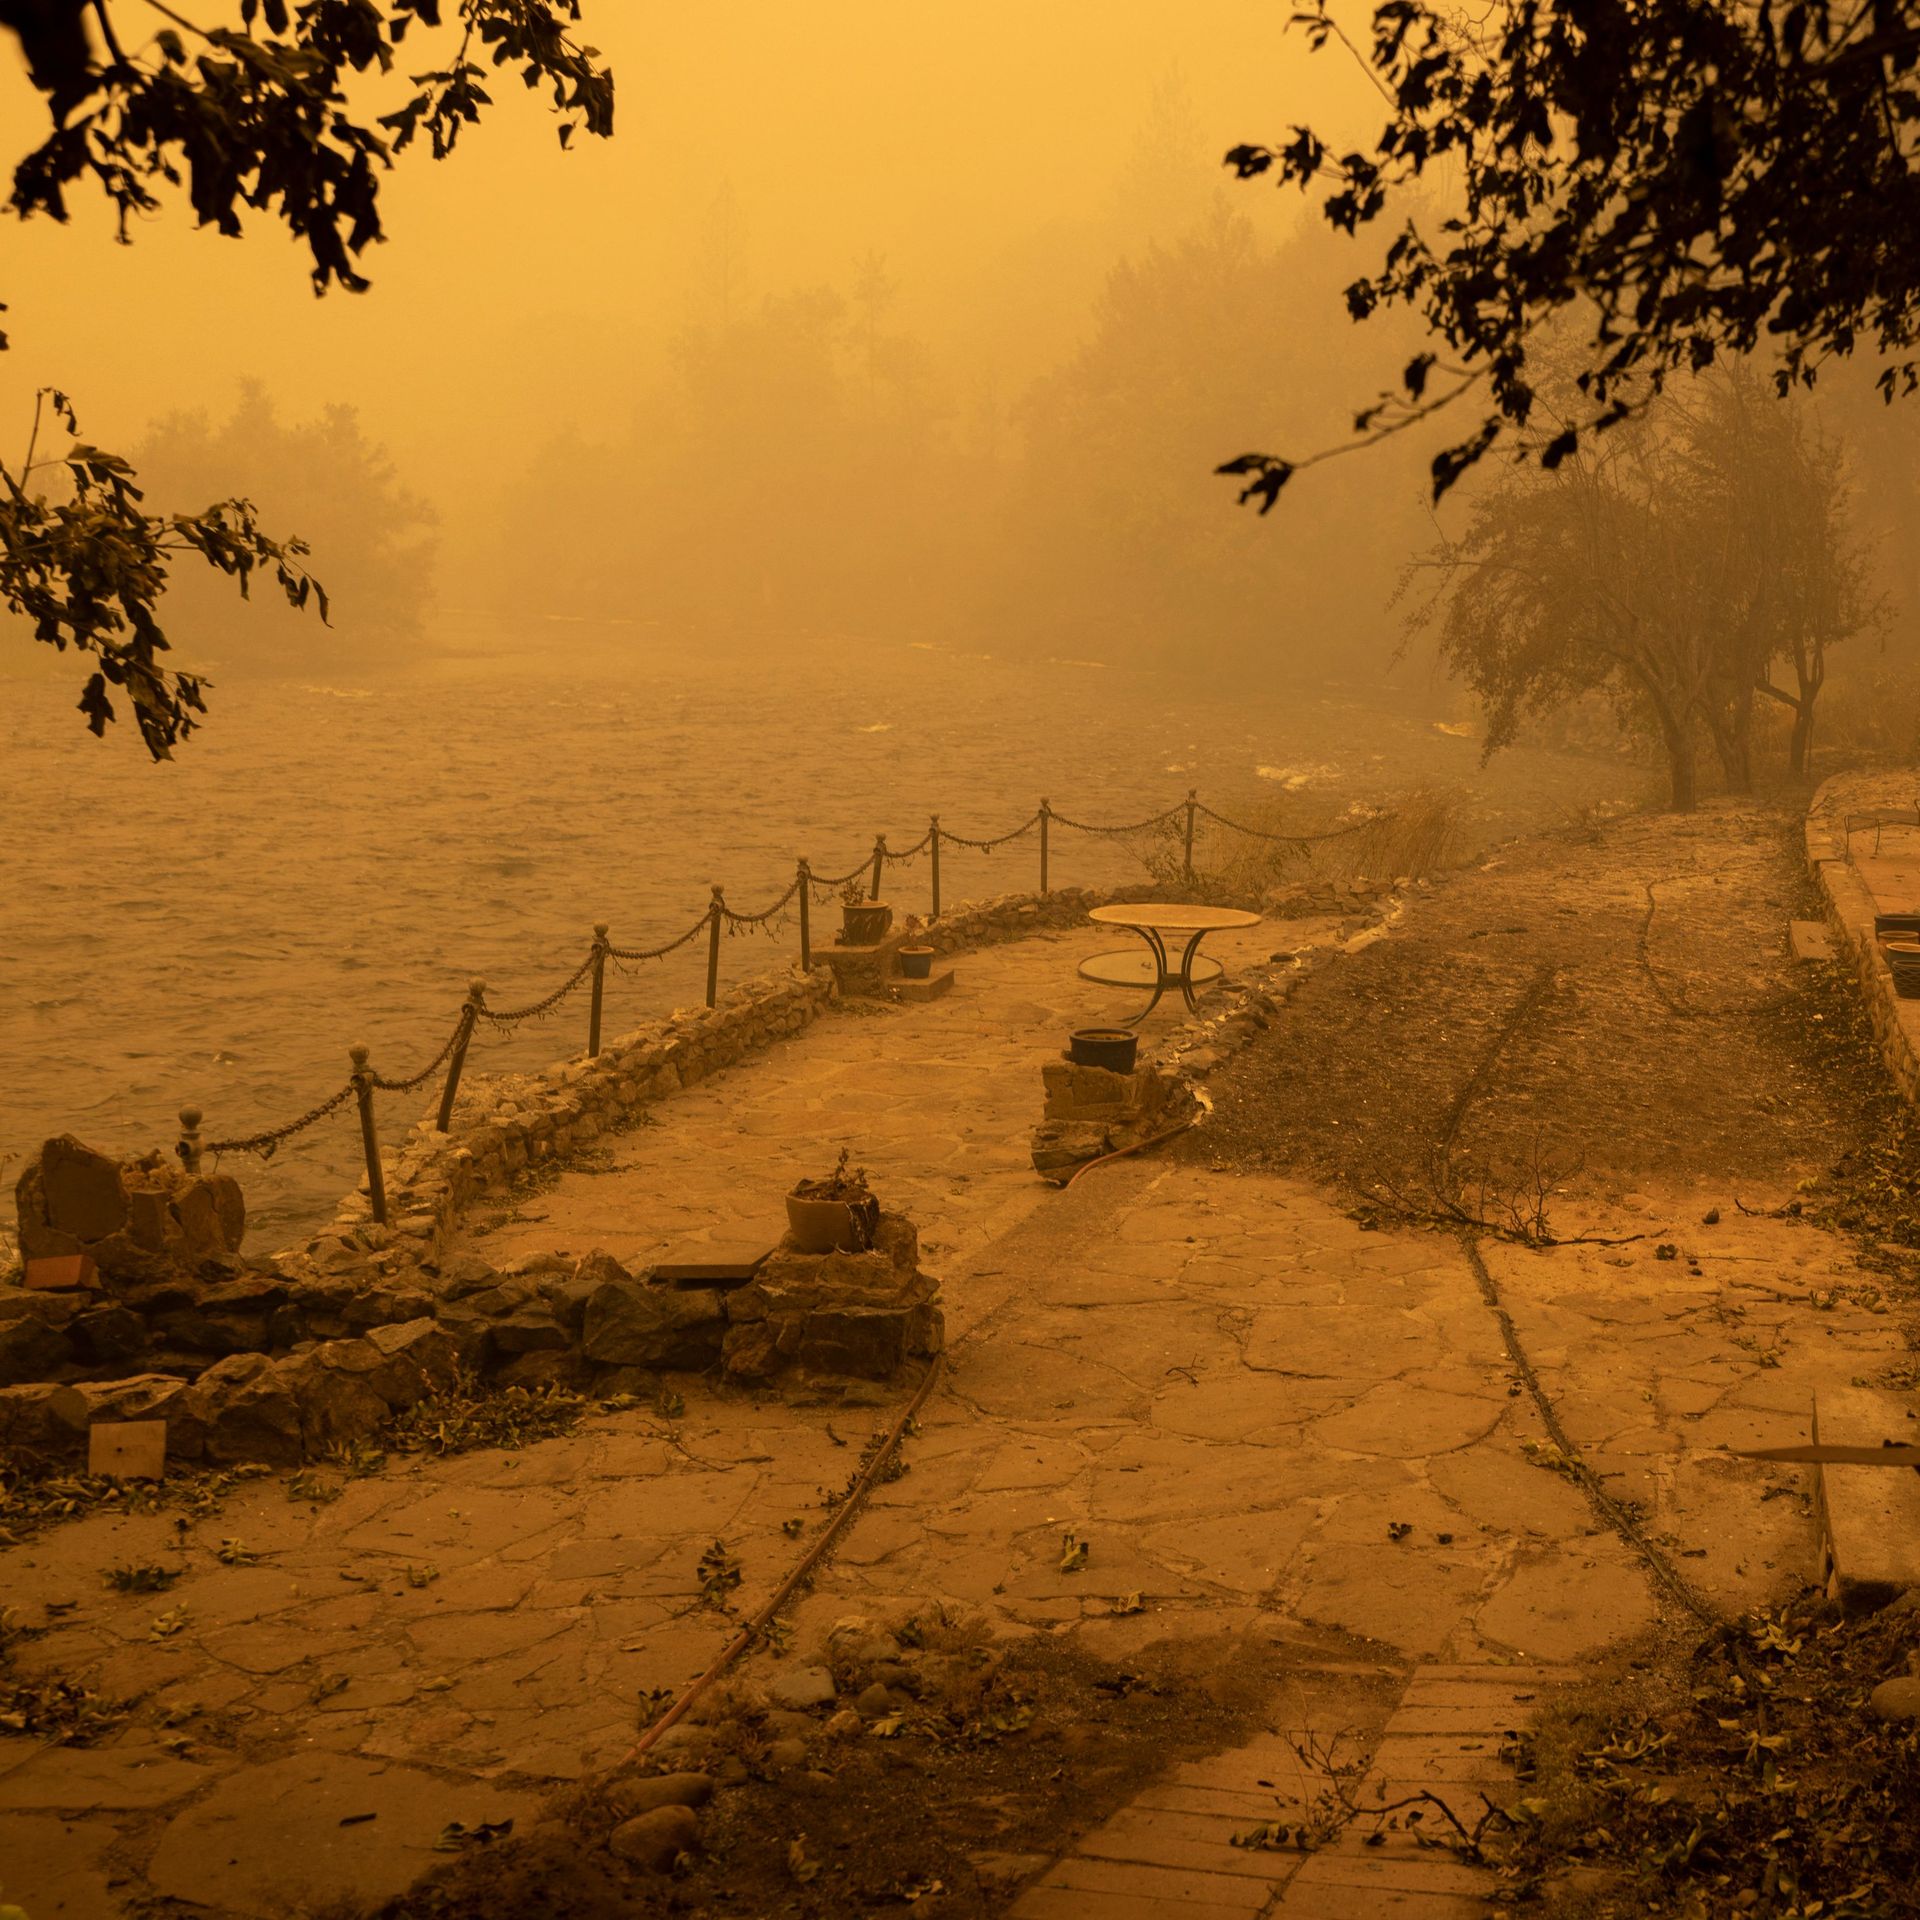 River-front property in the community of Klamath River lies in ruins after it burned in the McKinney Fire in the Klamath National Forest, northwest of Yreka, California, on July 31, 2022.